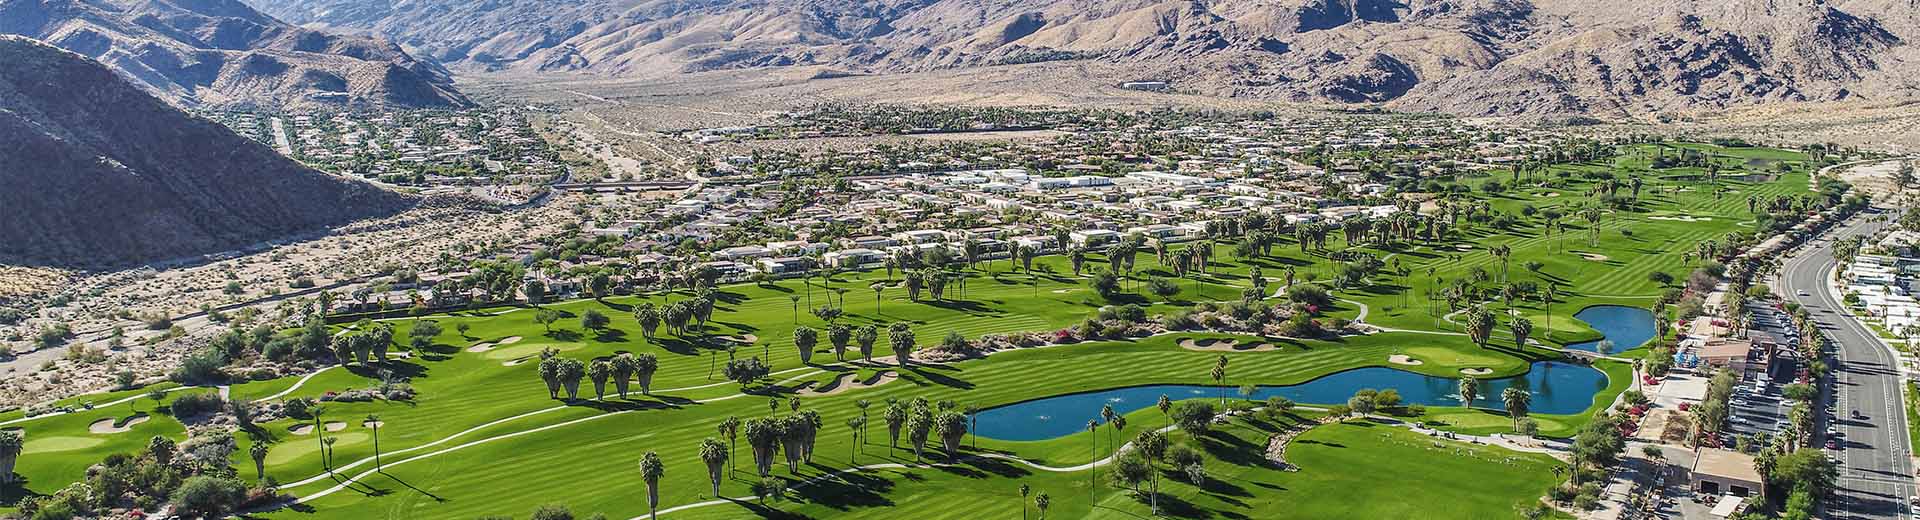 Srikingly green golf courses stand out against the faded browns of the desert that surrounds them.